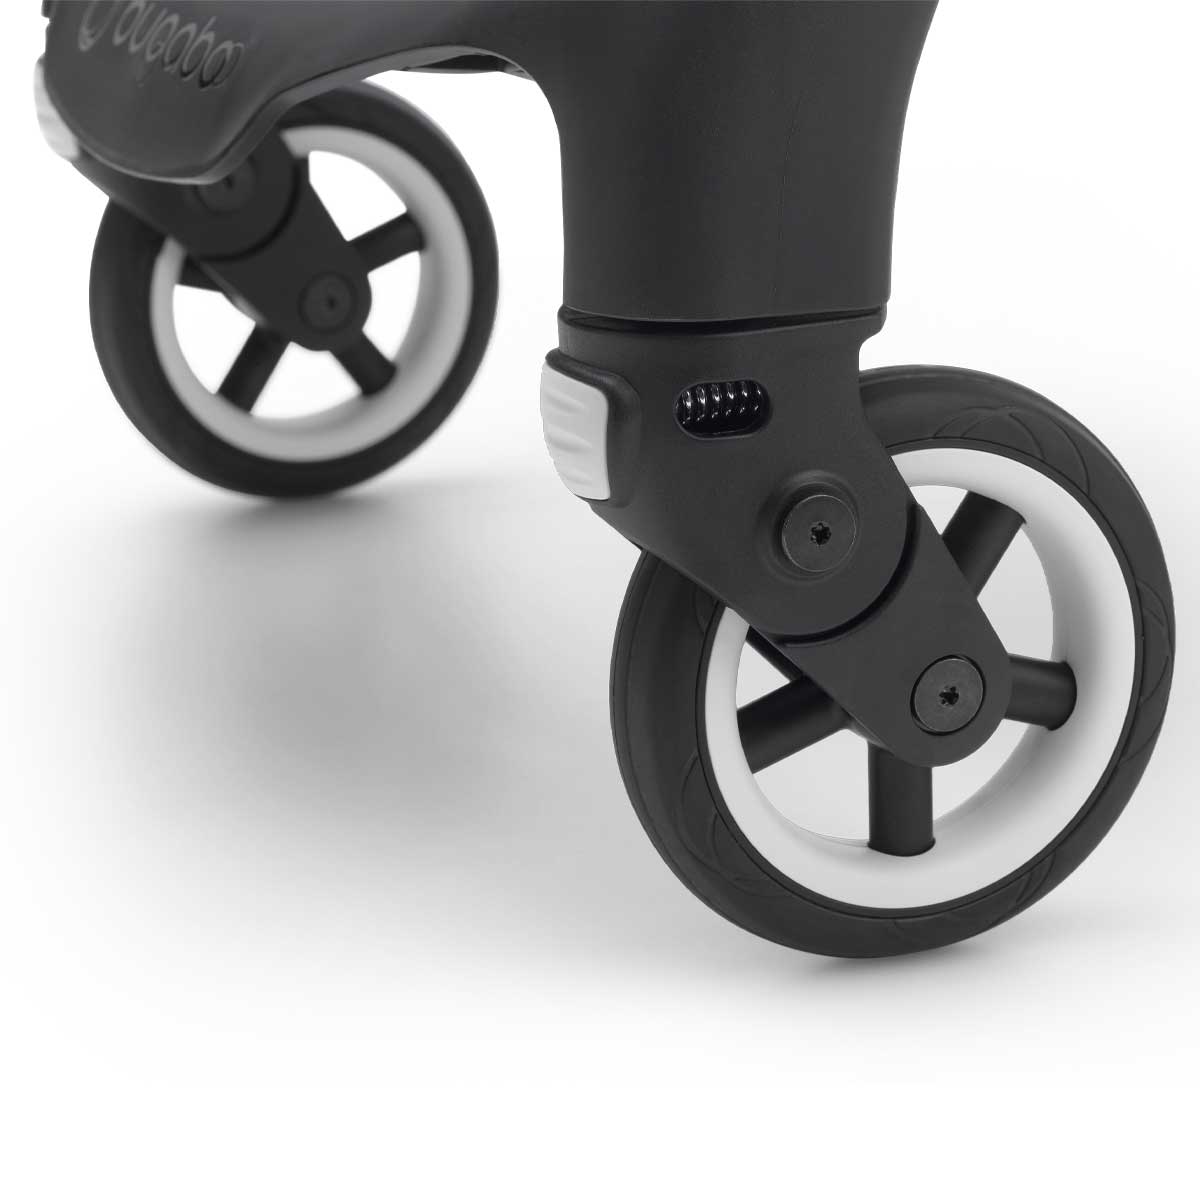 Bugaboo stroller Bugaboo Butterfly Complete Stroller Suspension